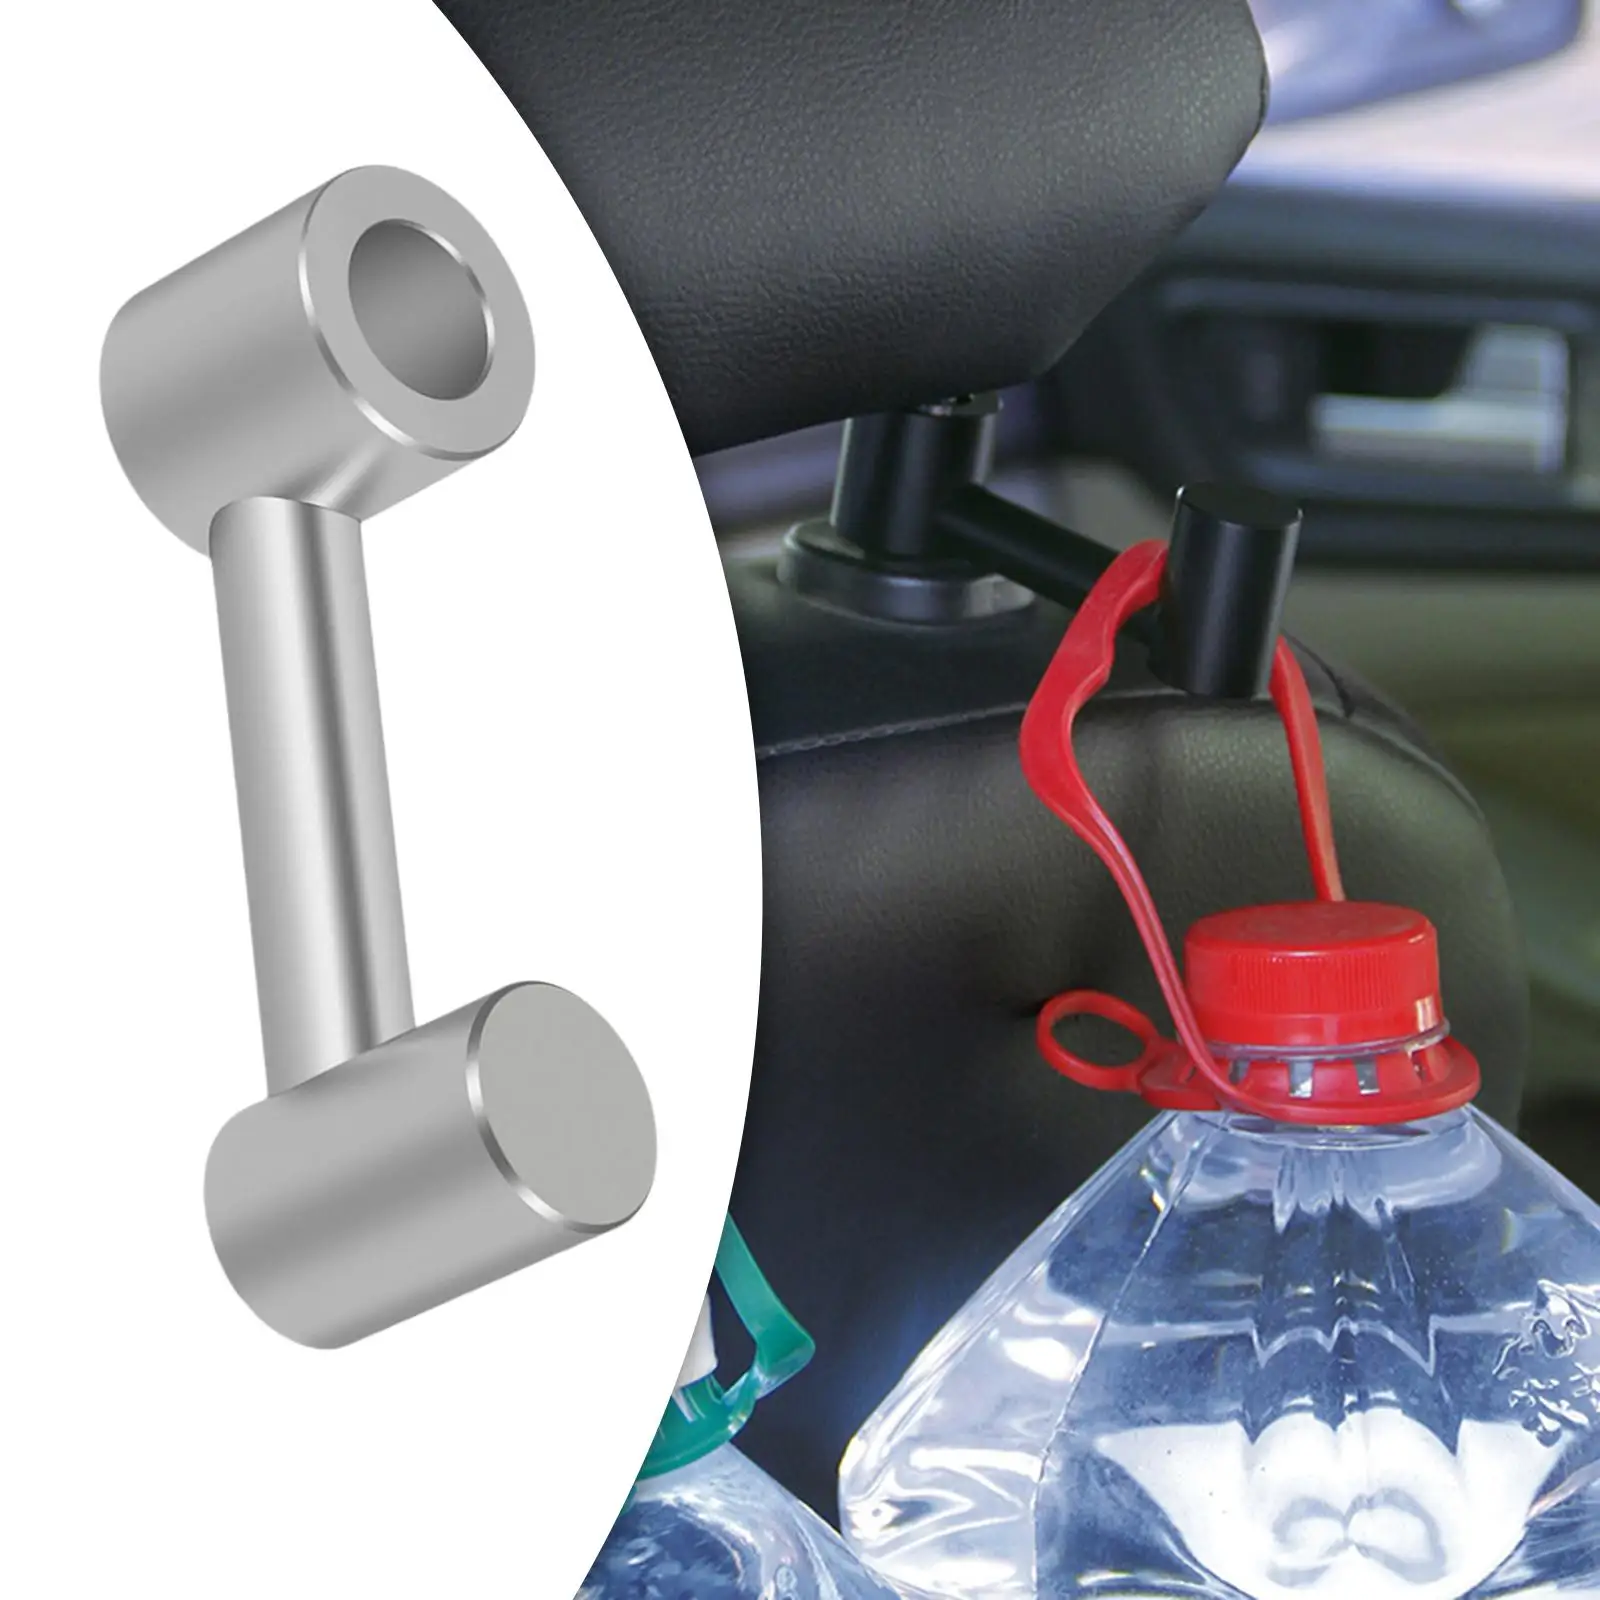  Headrest Hook Aluminum Alloy Stainless Metal Hanger Durable Interior Accessory Fits for Vehicle Driving Holder Purse Bags